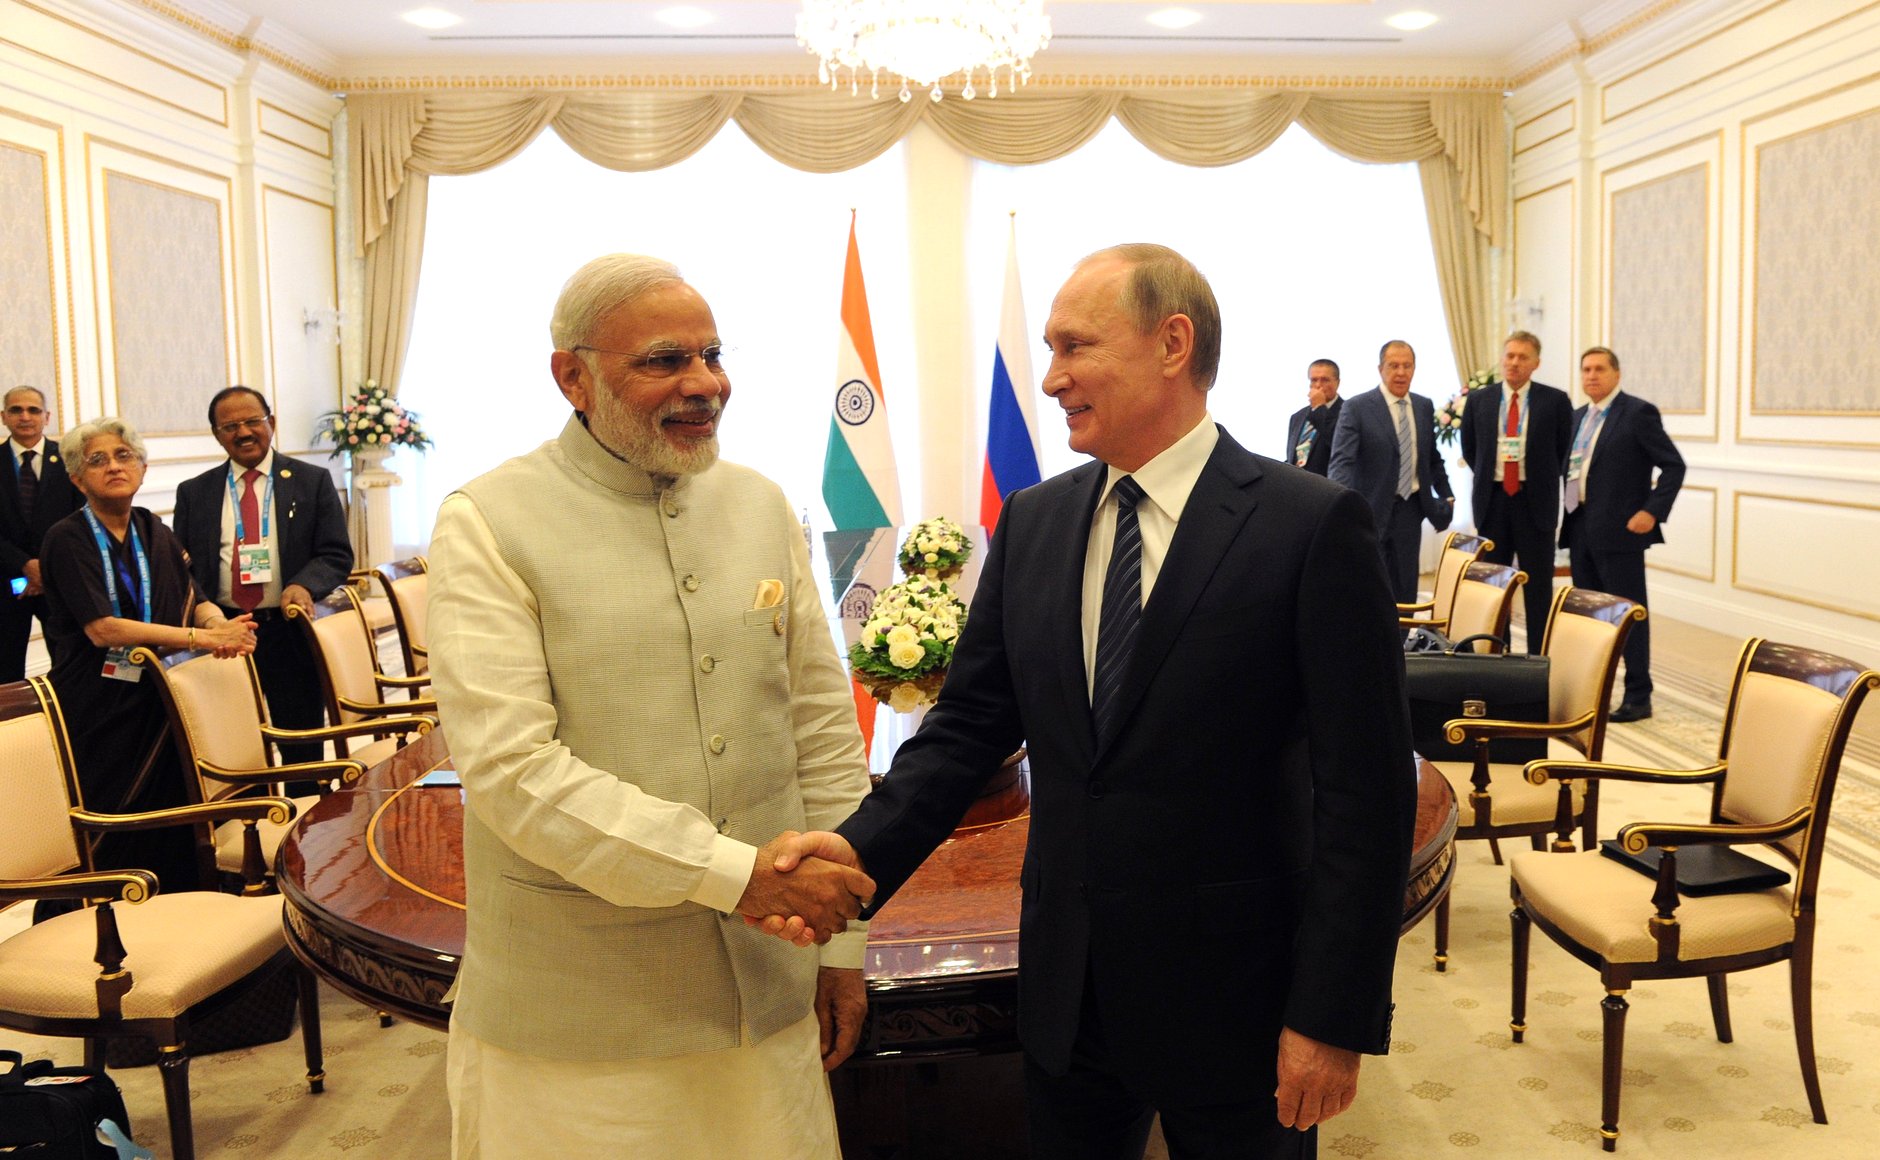 Modi thanked Putin for Russia’s strong support for India’s application to enter the Nuclear Suppliers Group (NSG).